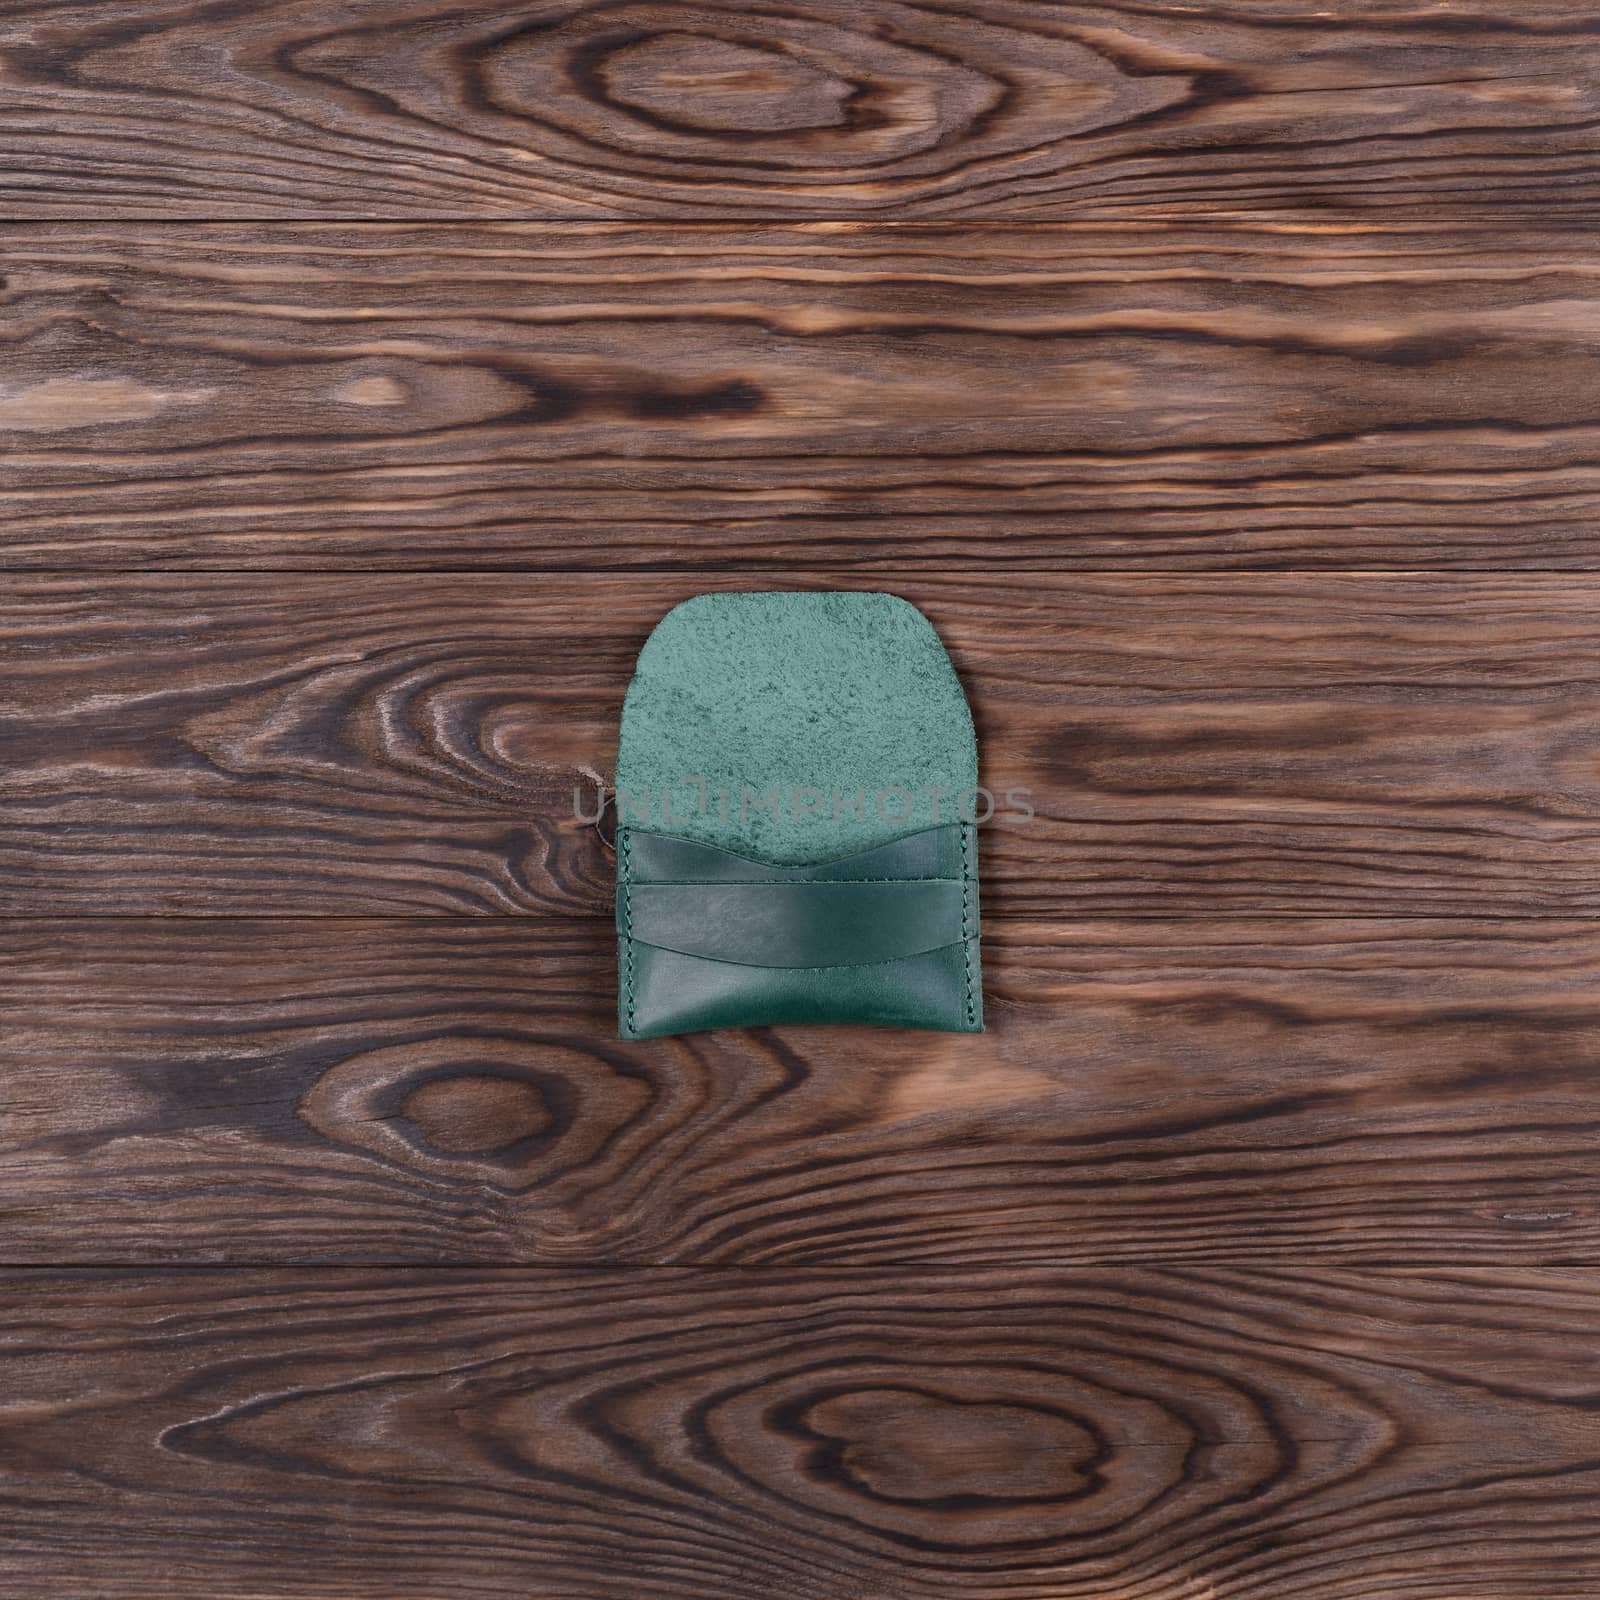 Flat lay photo of green colour handmade leather one pocket cardholder. Stock photo on wooden background.